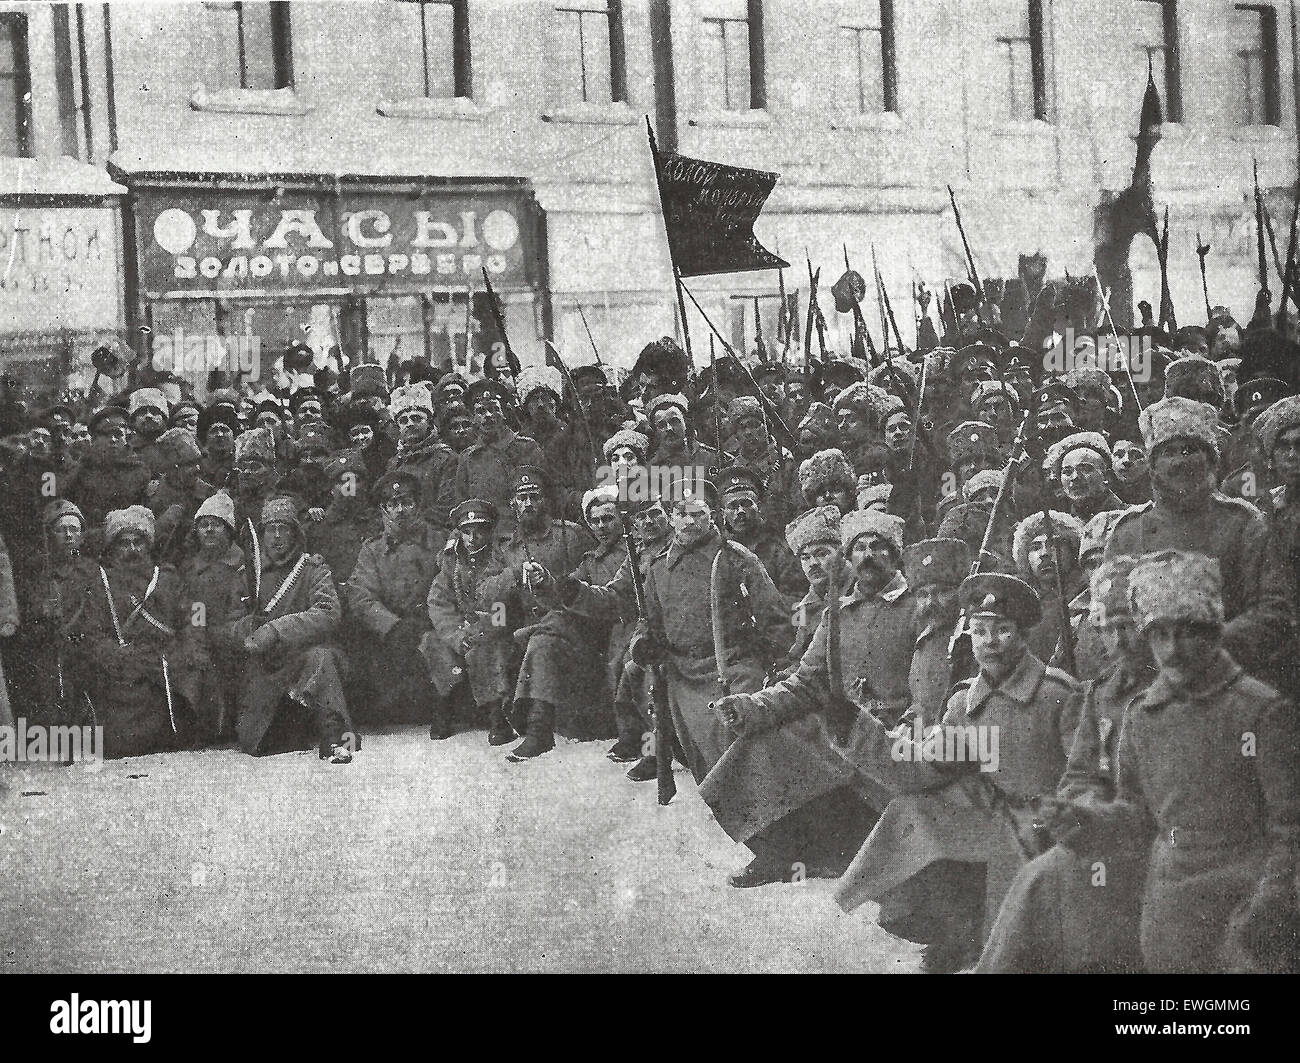 When hope was the Order of the Day - Soldiers marching to the Duma with banner inscribed 'Down with the Monarchy! Long live the Democratic Republic!' Russia 1917 Stock Photo